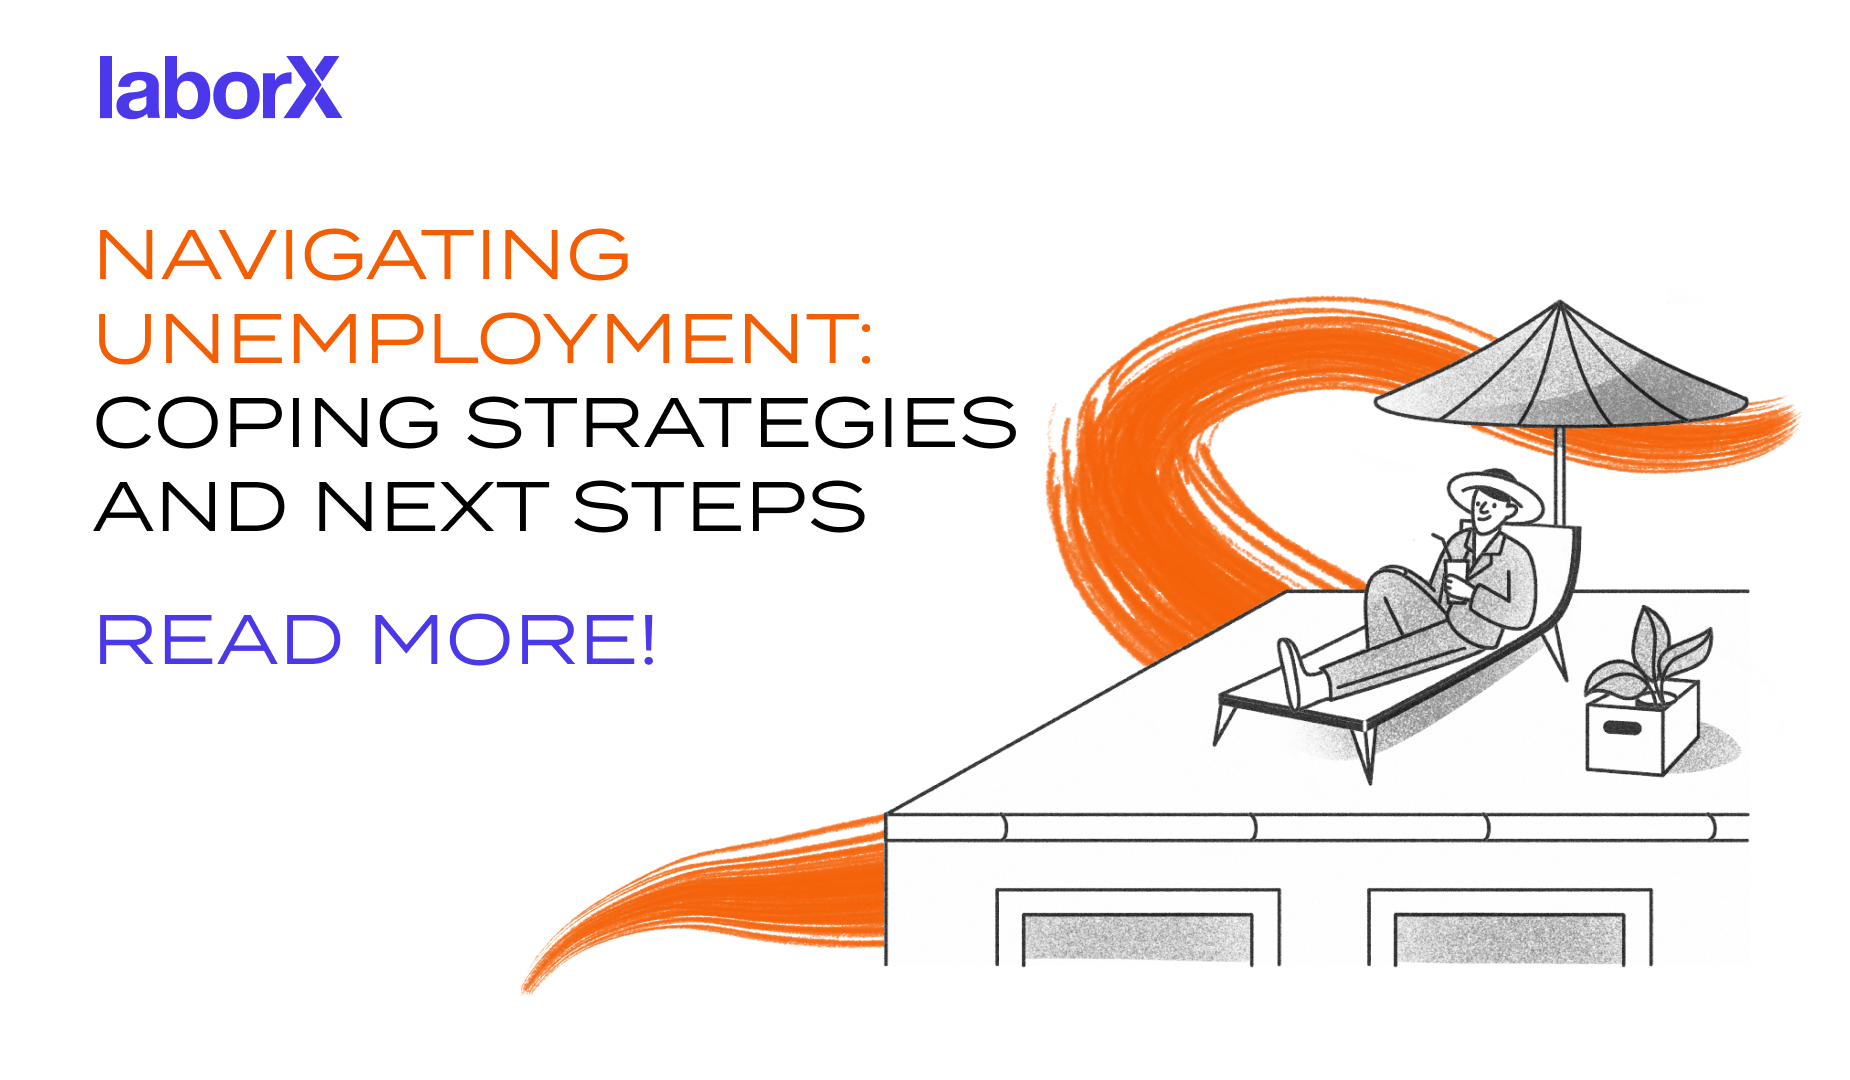 Navigating Unemployment: Coping Strategies And Next Steps